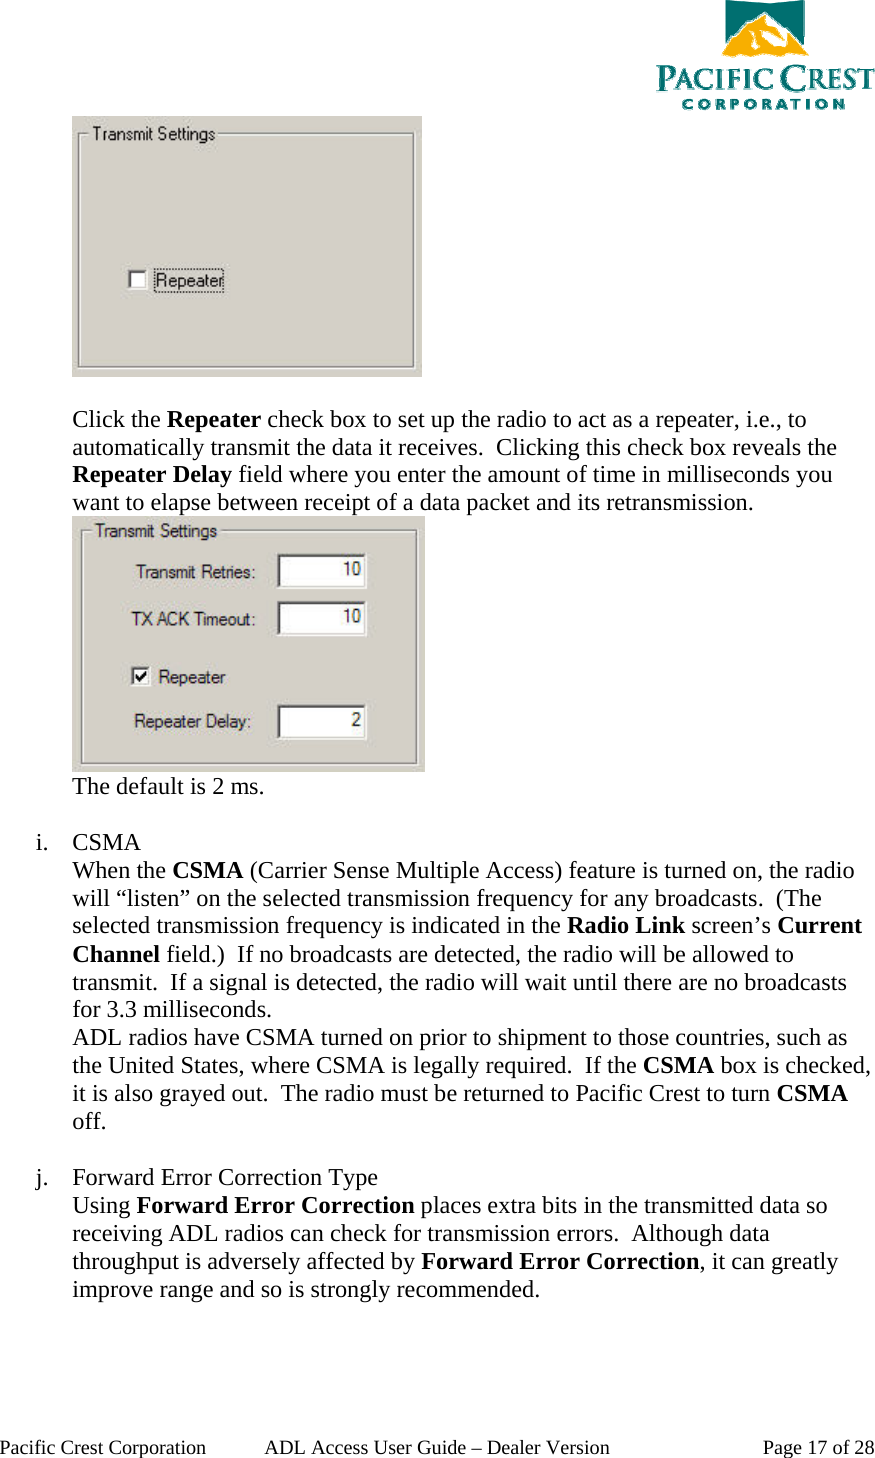  Pacific Crest Corporation  ADL Access User Guide – Dealer Version  Page 17 of 28   Click the Repeater check box to set up the radio to act as a repeater, i.e., to automatically transmit the data it receives.  Clicking this check box reveals the Repeater Delay field where you enter the amount of time in milliseconds you want to elapse between receipt of a data packet and its retransmission.  The default is 2 ms.  i. CSMA When the CSMA (Carrier Sense Multiple Access) feature is turned on, the radio will “listen” on the selected transmission frequency for any broadcasts.  (The selected transmission frequency is indicated in the Radio Link screen’s Current Channel field.)  If no broadcasts are detected, the radio will be allowed to transmit.  If a signal is detected, the radio will wait until there are no broadcasts for 3.3 milliseconds. ADL radios have CSMA turned on prior to shipment to those countries, such as the United States, where CSMA is legally required.  If the CSMA box is checked, it is also grayed out.  The radio must be returned to Pacific Crest to turn CSMA off.  j. Forward Error Correction Type Using Forward Error Correction places extra bits in the transmitted data so receiving ADL radios can check for transmission errors.  Although data throughput is adversely affected by Forward Error Correction, it can greatly improve range and so is strongly recommended.  